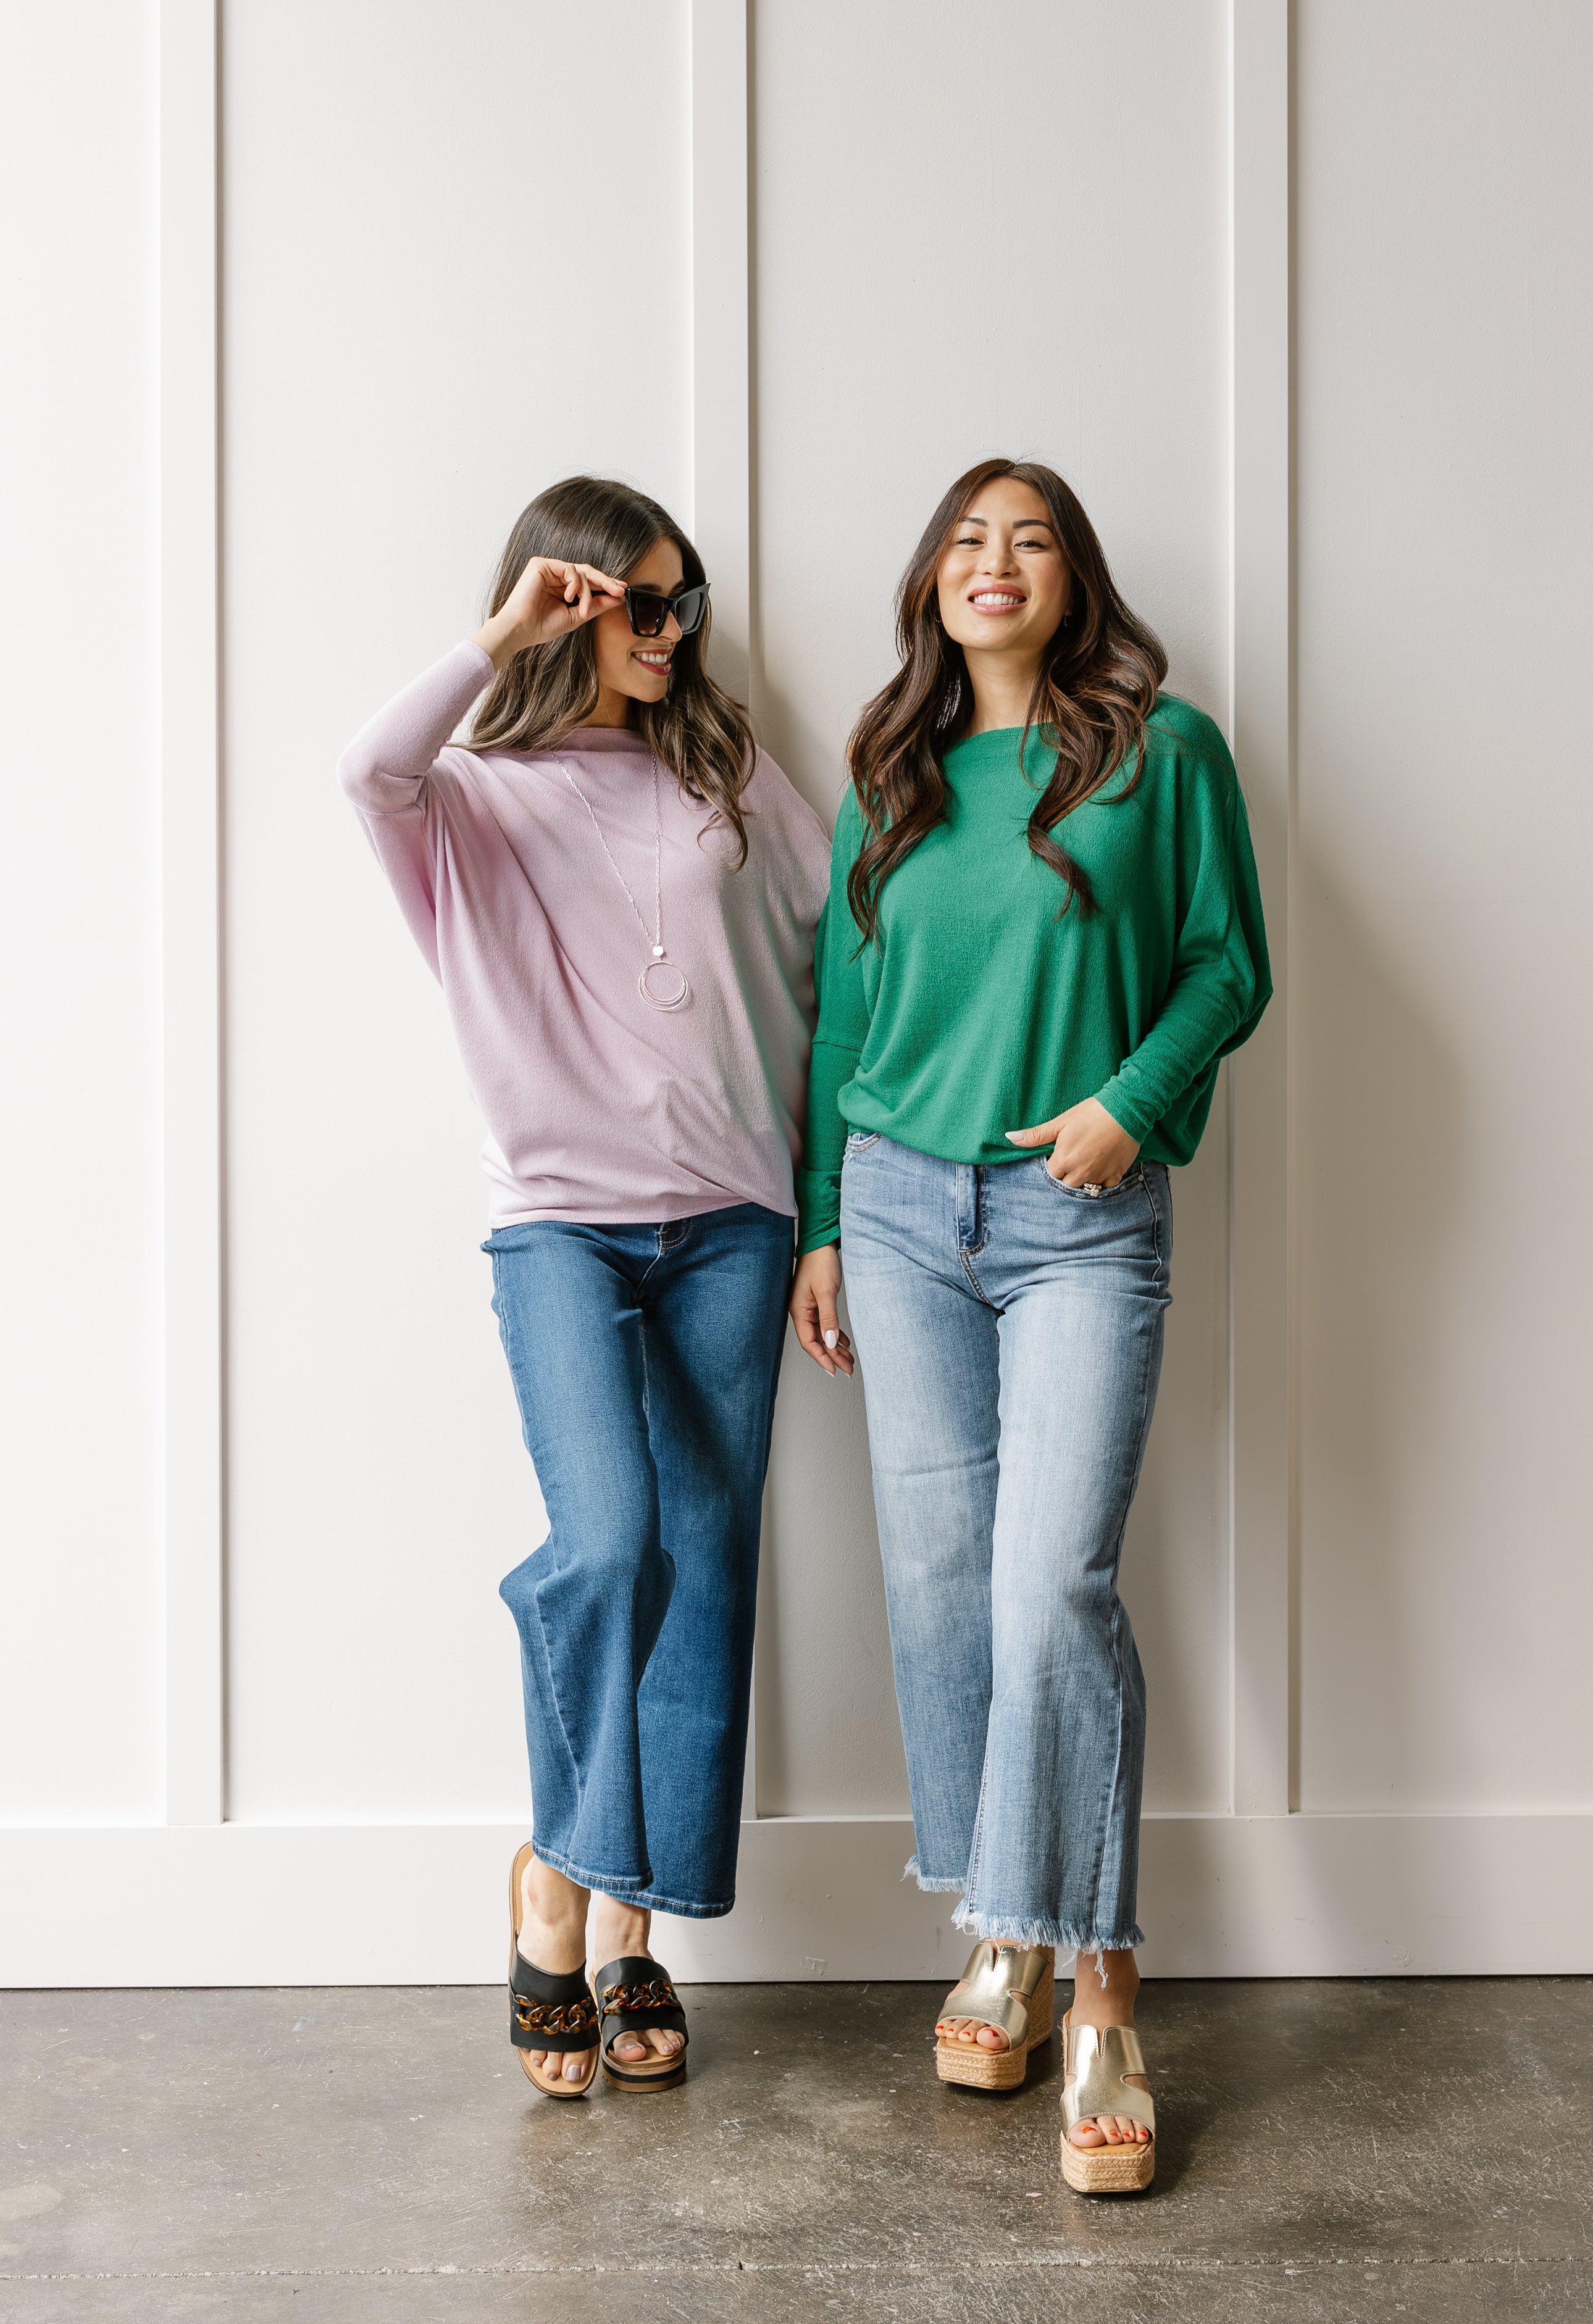 Favorite Comfy Tunic - TRUE GREEN - willows clothing L/S Shirt